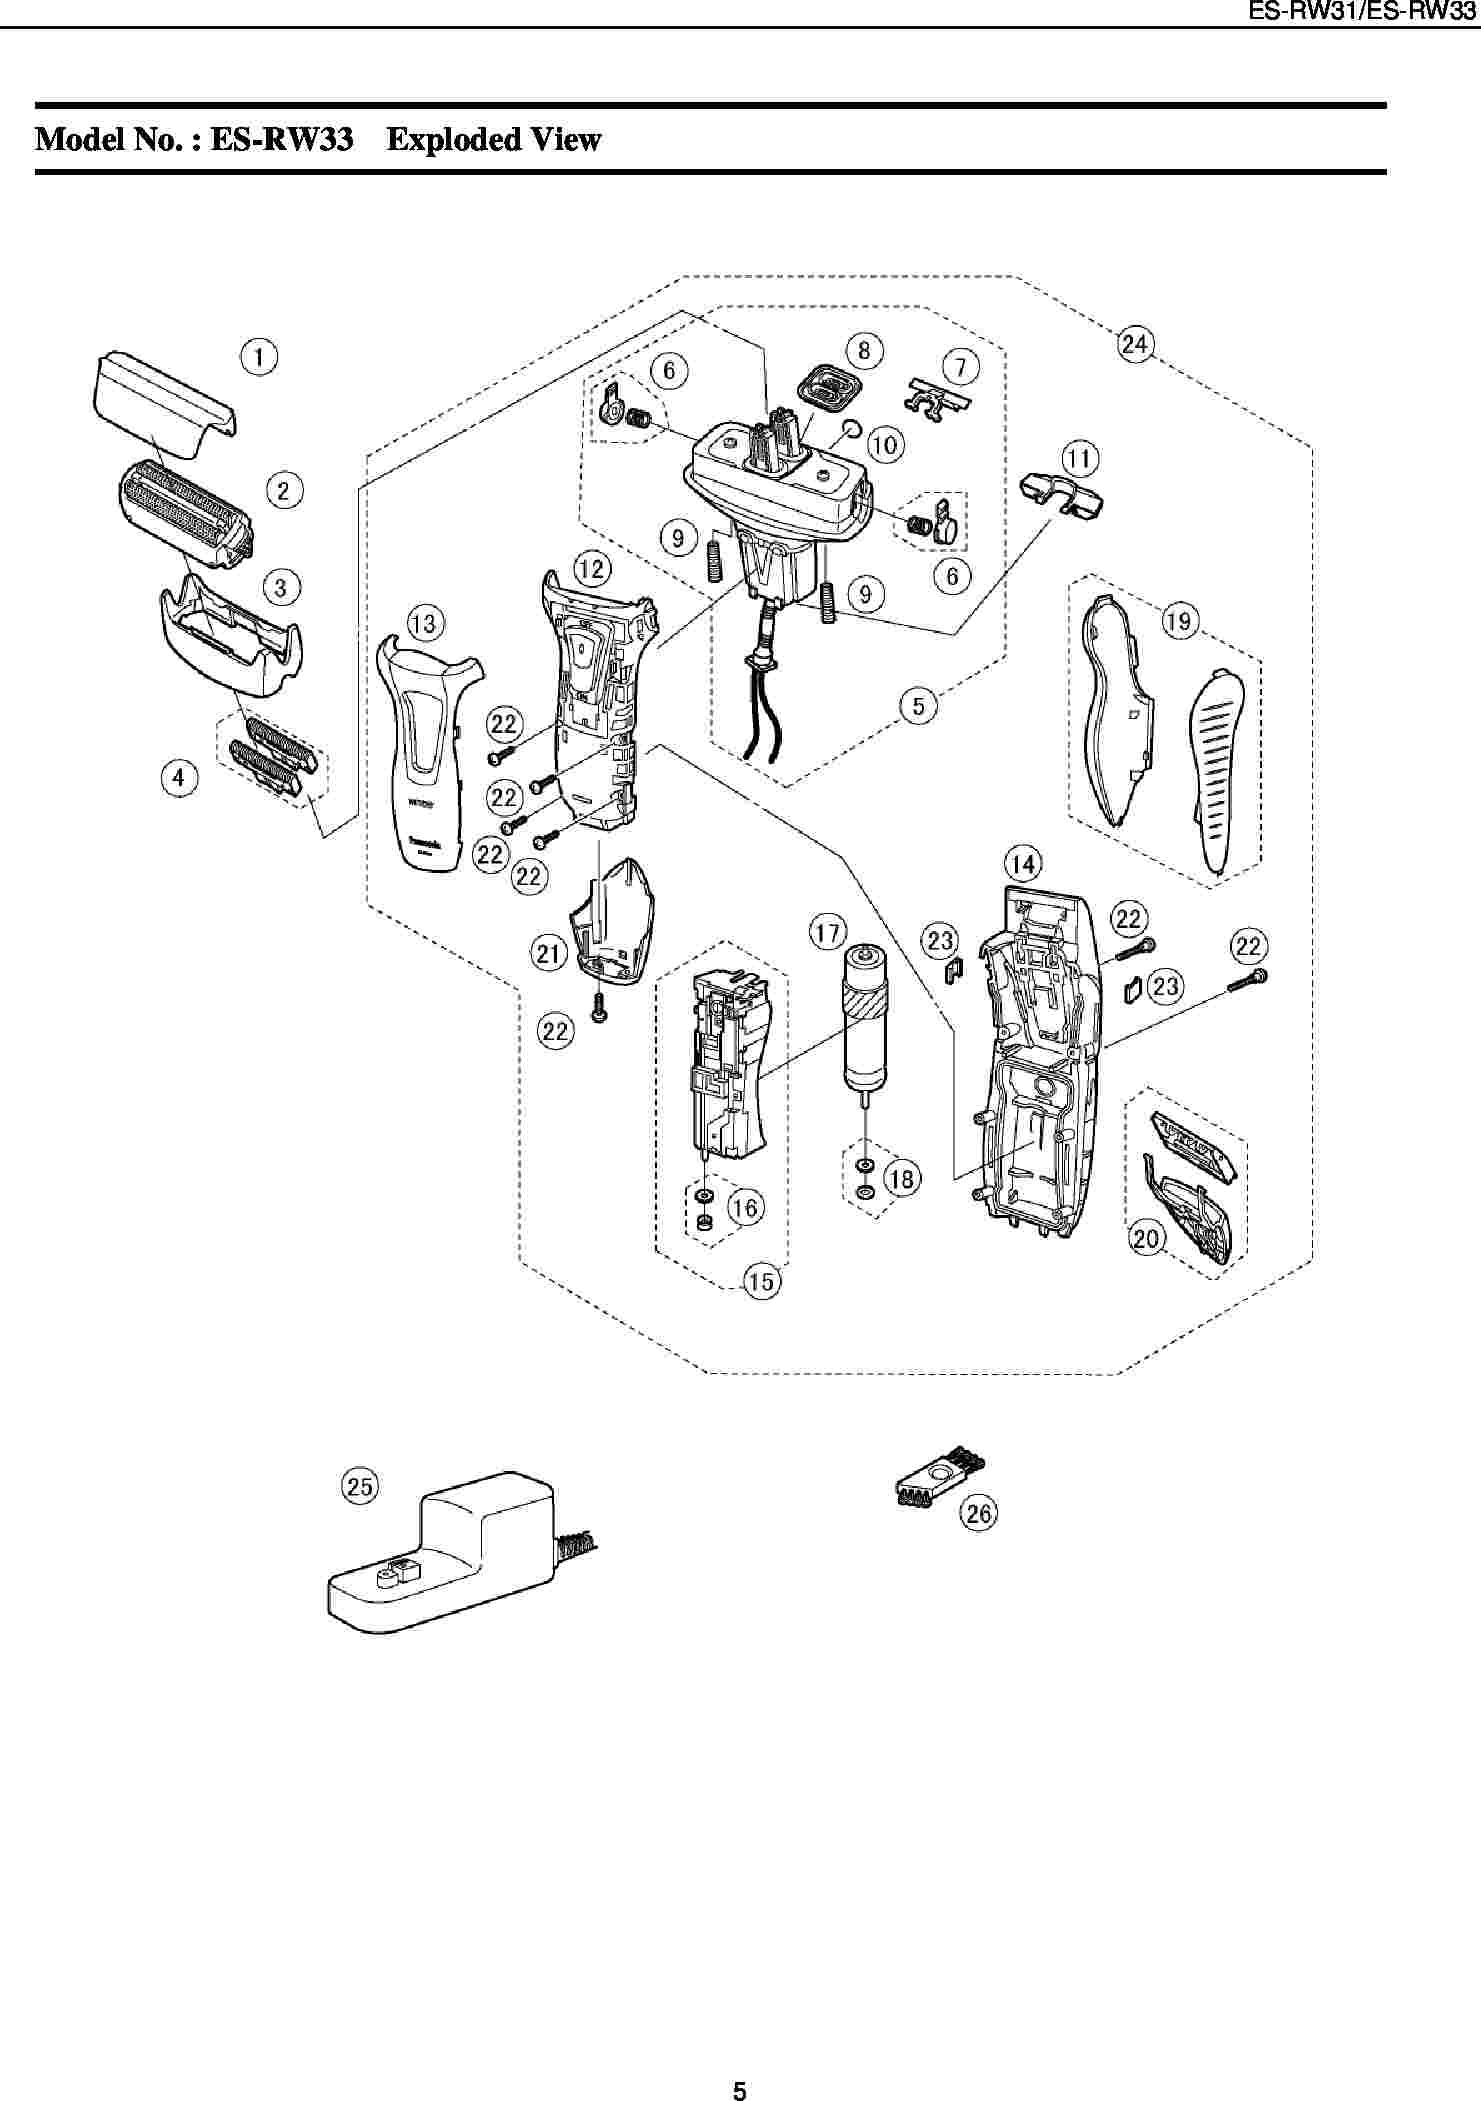 : Exploded View